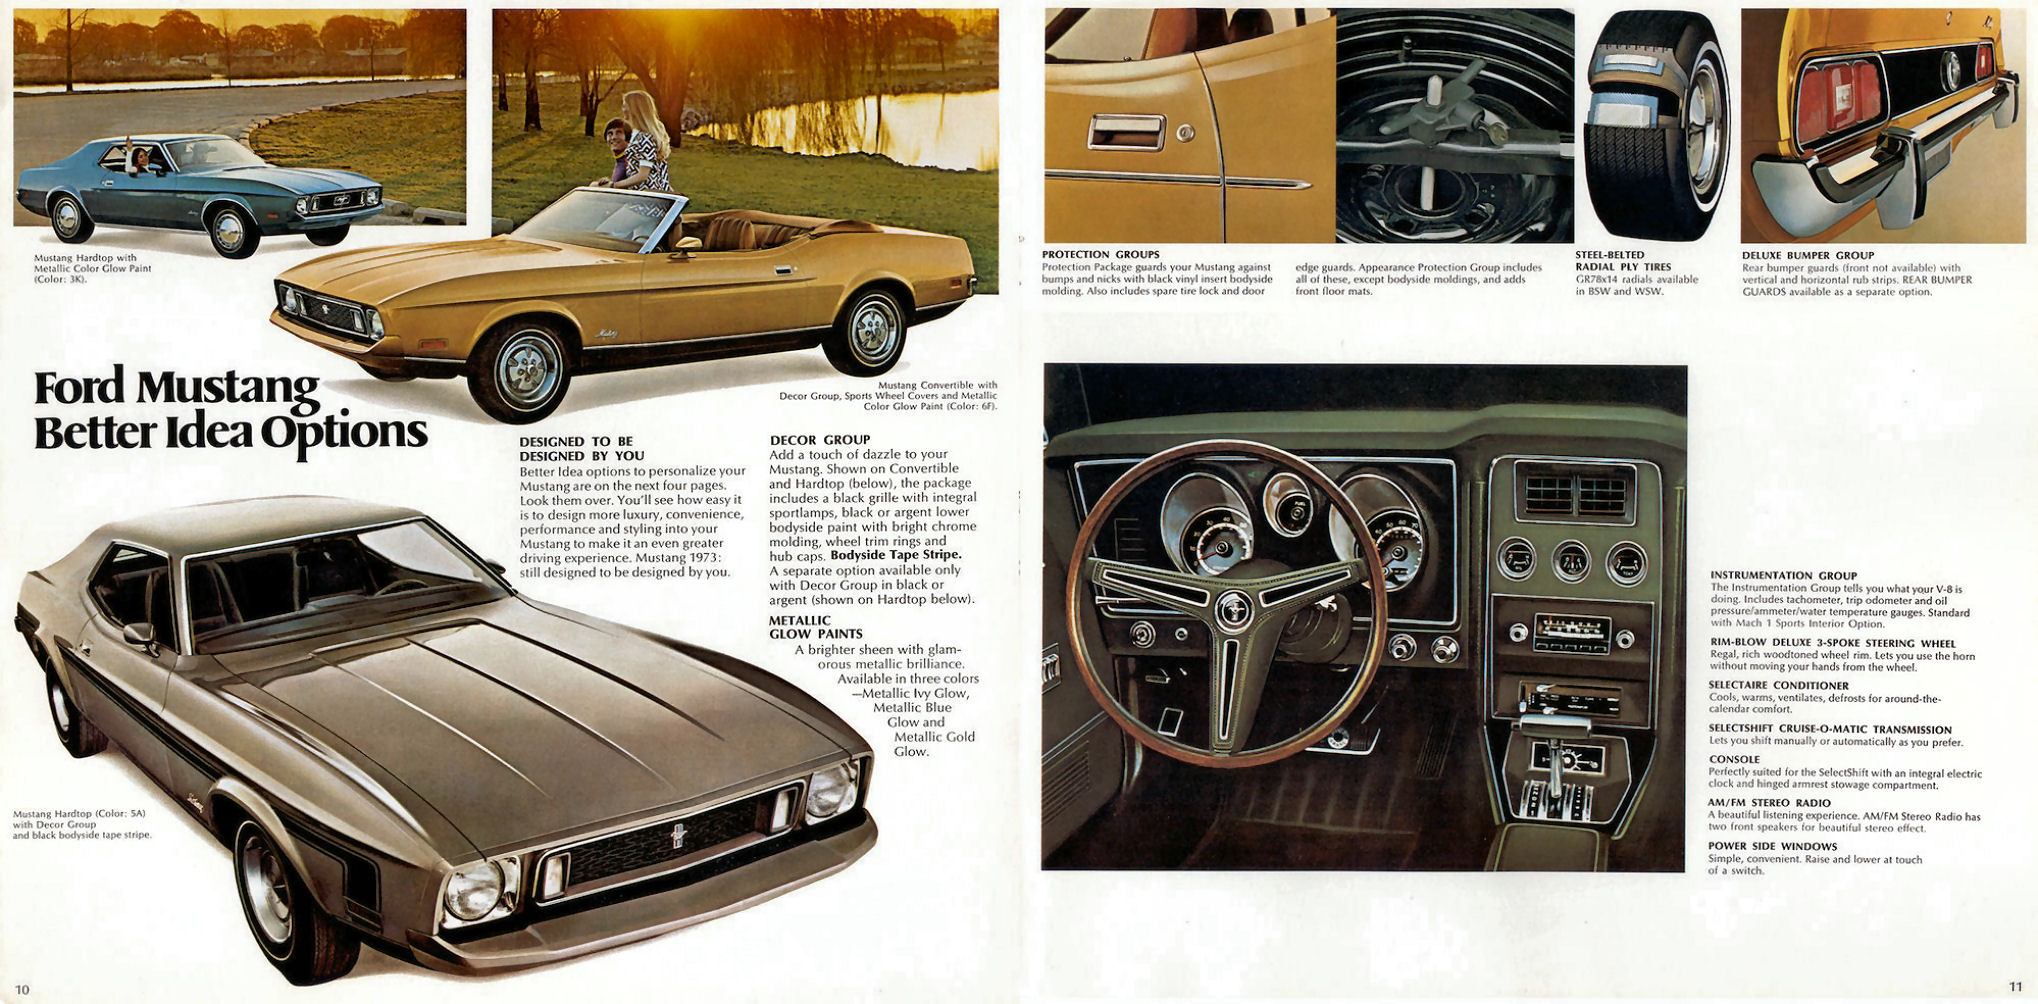 1973_Ford_Mustang-10-11